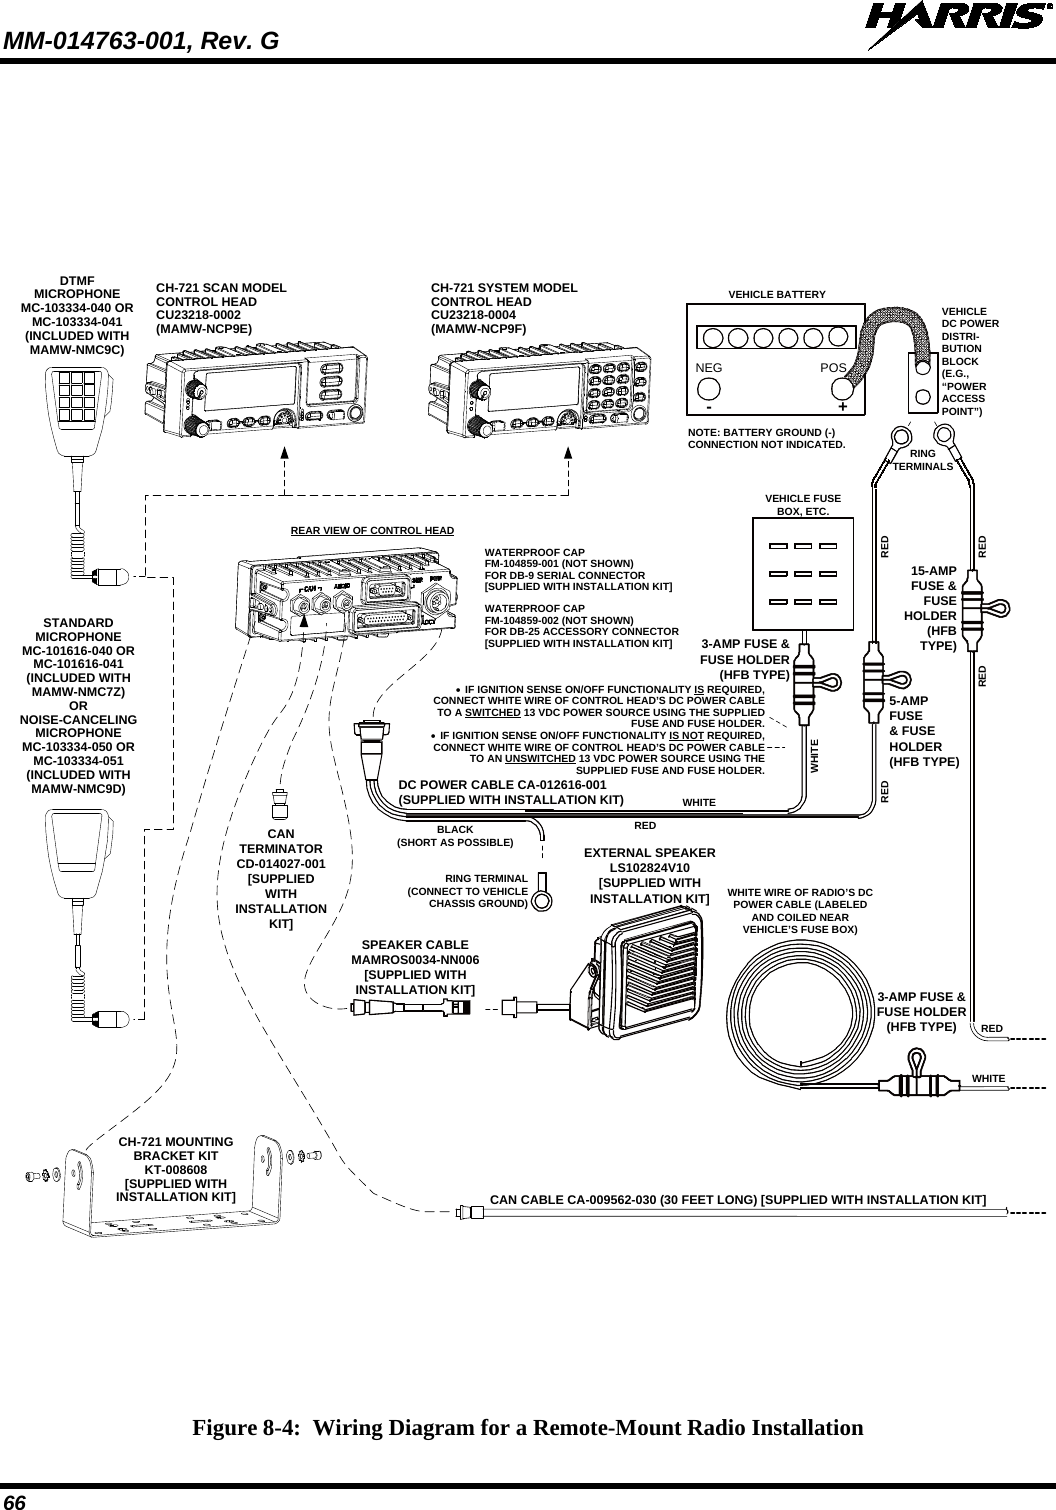 MM-014763-001, Rev. G   66  Figure 8-4:  Wiring Diagram for a Remote-Mount Radio Installation CH-721 SCAN MODELCONTROL HEADCU23218-0002(MAMW-NCP9E)CH-721 SYSTEM MODELCONTROL HEADCU23218-0004(MAMW-NCP9F)DTMFMICROPHONEMC-103334-040 ORMC-103334-041(INCLUDED WITHMAMW-NMC9C)STANDARD MICROPHONEMC-101616-040 ORMC-101616-041(INCLUDED WITHMAMW-NMC7Z)ORNOISE-CANCELINGMICROPHONEMC-103334-050 ORMC-103334-051(INCLUDED WITHMAMW-NMC9D)CH-721 MOUNTING BRACKET KITKT-008608[SUPPLIED WITH INSTALLATION KIT]•  IF IGNITION SENSE ON/OFF FUNCTIONALITY IS REQUIRED, CONNECT WHITE WIRE OF CONTROL HEAD’S DC POWER CABLE TO A SWITCHED 13 VDC POWER SOURCE USING THE SUPPLIED FUSE AND FUSE HOLDER.•  IF IGNITION SENSE ON/OFF FUNCTIONALITY IS NOT REQUIRED, CONNECT WHITE WIRE OF CONTROL HEAD’S DC POWER CABLE TO AN UNSWITCHED 13 VDC POWER SOURCE USING THE SUPPLIED FUSE AND FUSE HOLDER.WATERPROOF CAPFM-104859-001 (NOT SHOWN)FOR DB-9 SERIAL CONNECTOR[SUPPLIED WITH INSTALLATION KIT]WATERPROOF CAPFM-104859-002 (NOT SHOWN)FOR DB-25 ACCESSORY CONNECTOR[SUPPLIED WITH INSTALLATION KIT]REAR VIEW OF CONTROL HEADNEG POS3-AMP FUSE &amp; FUSE HOLDER (HFB TYPE) REDRED RED5-AMPFUSE&amp; FUSE HOLDER (HFB TYPE)3-AMP FUSE &amp; FUSE HOLDER(HFB TYPE)15-AMPFUSE &amp; FUSE HOLDER(HFB TYPE)REDWHITEREDRINGTERMINALSVEHICLEDC POWER DISTRI-BUTION BLOCK(E.G., “POWER ACCESS POINT”)VEHICLE BATTERY+-NOTE: BATTERY GROUND (-) CONNECTION NOT INDICATED.CAN TERMINATORCD-014027-001[SUPPLIED WITH INSTALLATION KIT]REDWHITEBLACK(SHORT AS POSSIBLE)RING TERMINAL (CONNECT TO VEHICLE CHASSIS GROUND)CAN CABLE CA-009562-030 (30 FEET LONG) [SUPPLIED WITH INSTALLATION KIT]SPEAKER CABLEMAMROS0034-NN006[SUPPLIED WITHINSTALLATION KIT]EXTERNAL SPEAKERLS102824V10[SUPPLIED WITHINSTALLATION KIT] WHITE WIRE OF RADIO’S DC POWER CABLE (LABELED AND COILED NEAR VEHICLE’S FUSE BOX)DC POWER CABLE CA-012616-001(SUPPLIED WITH INSTALLATION KIT)VEHICLE FUSE BOX, ETC.WHITE